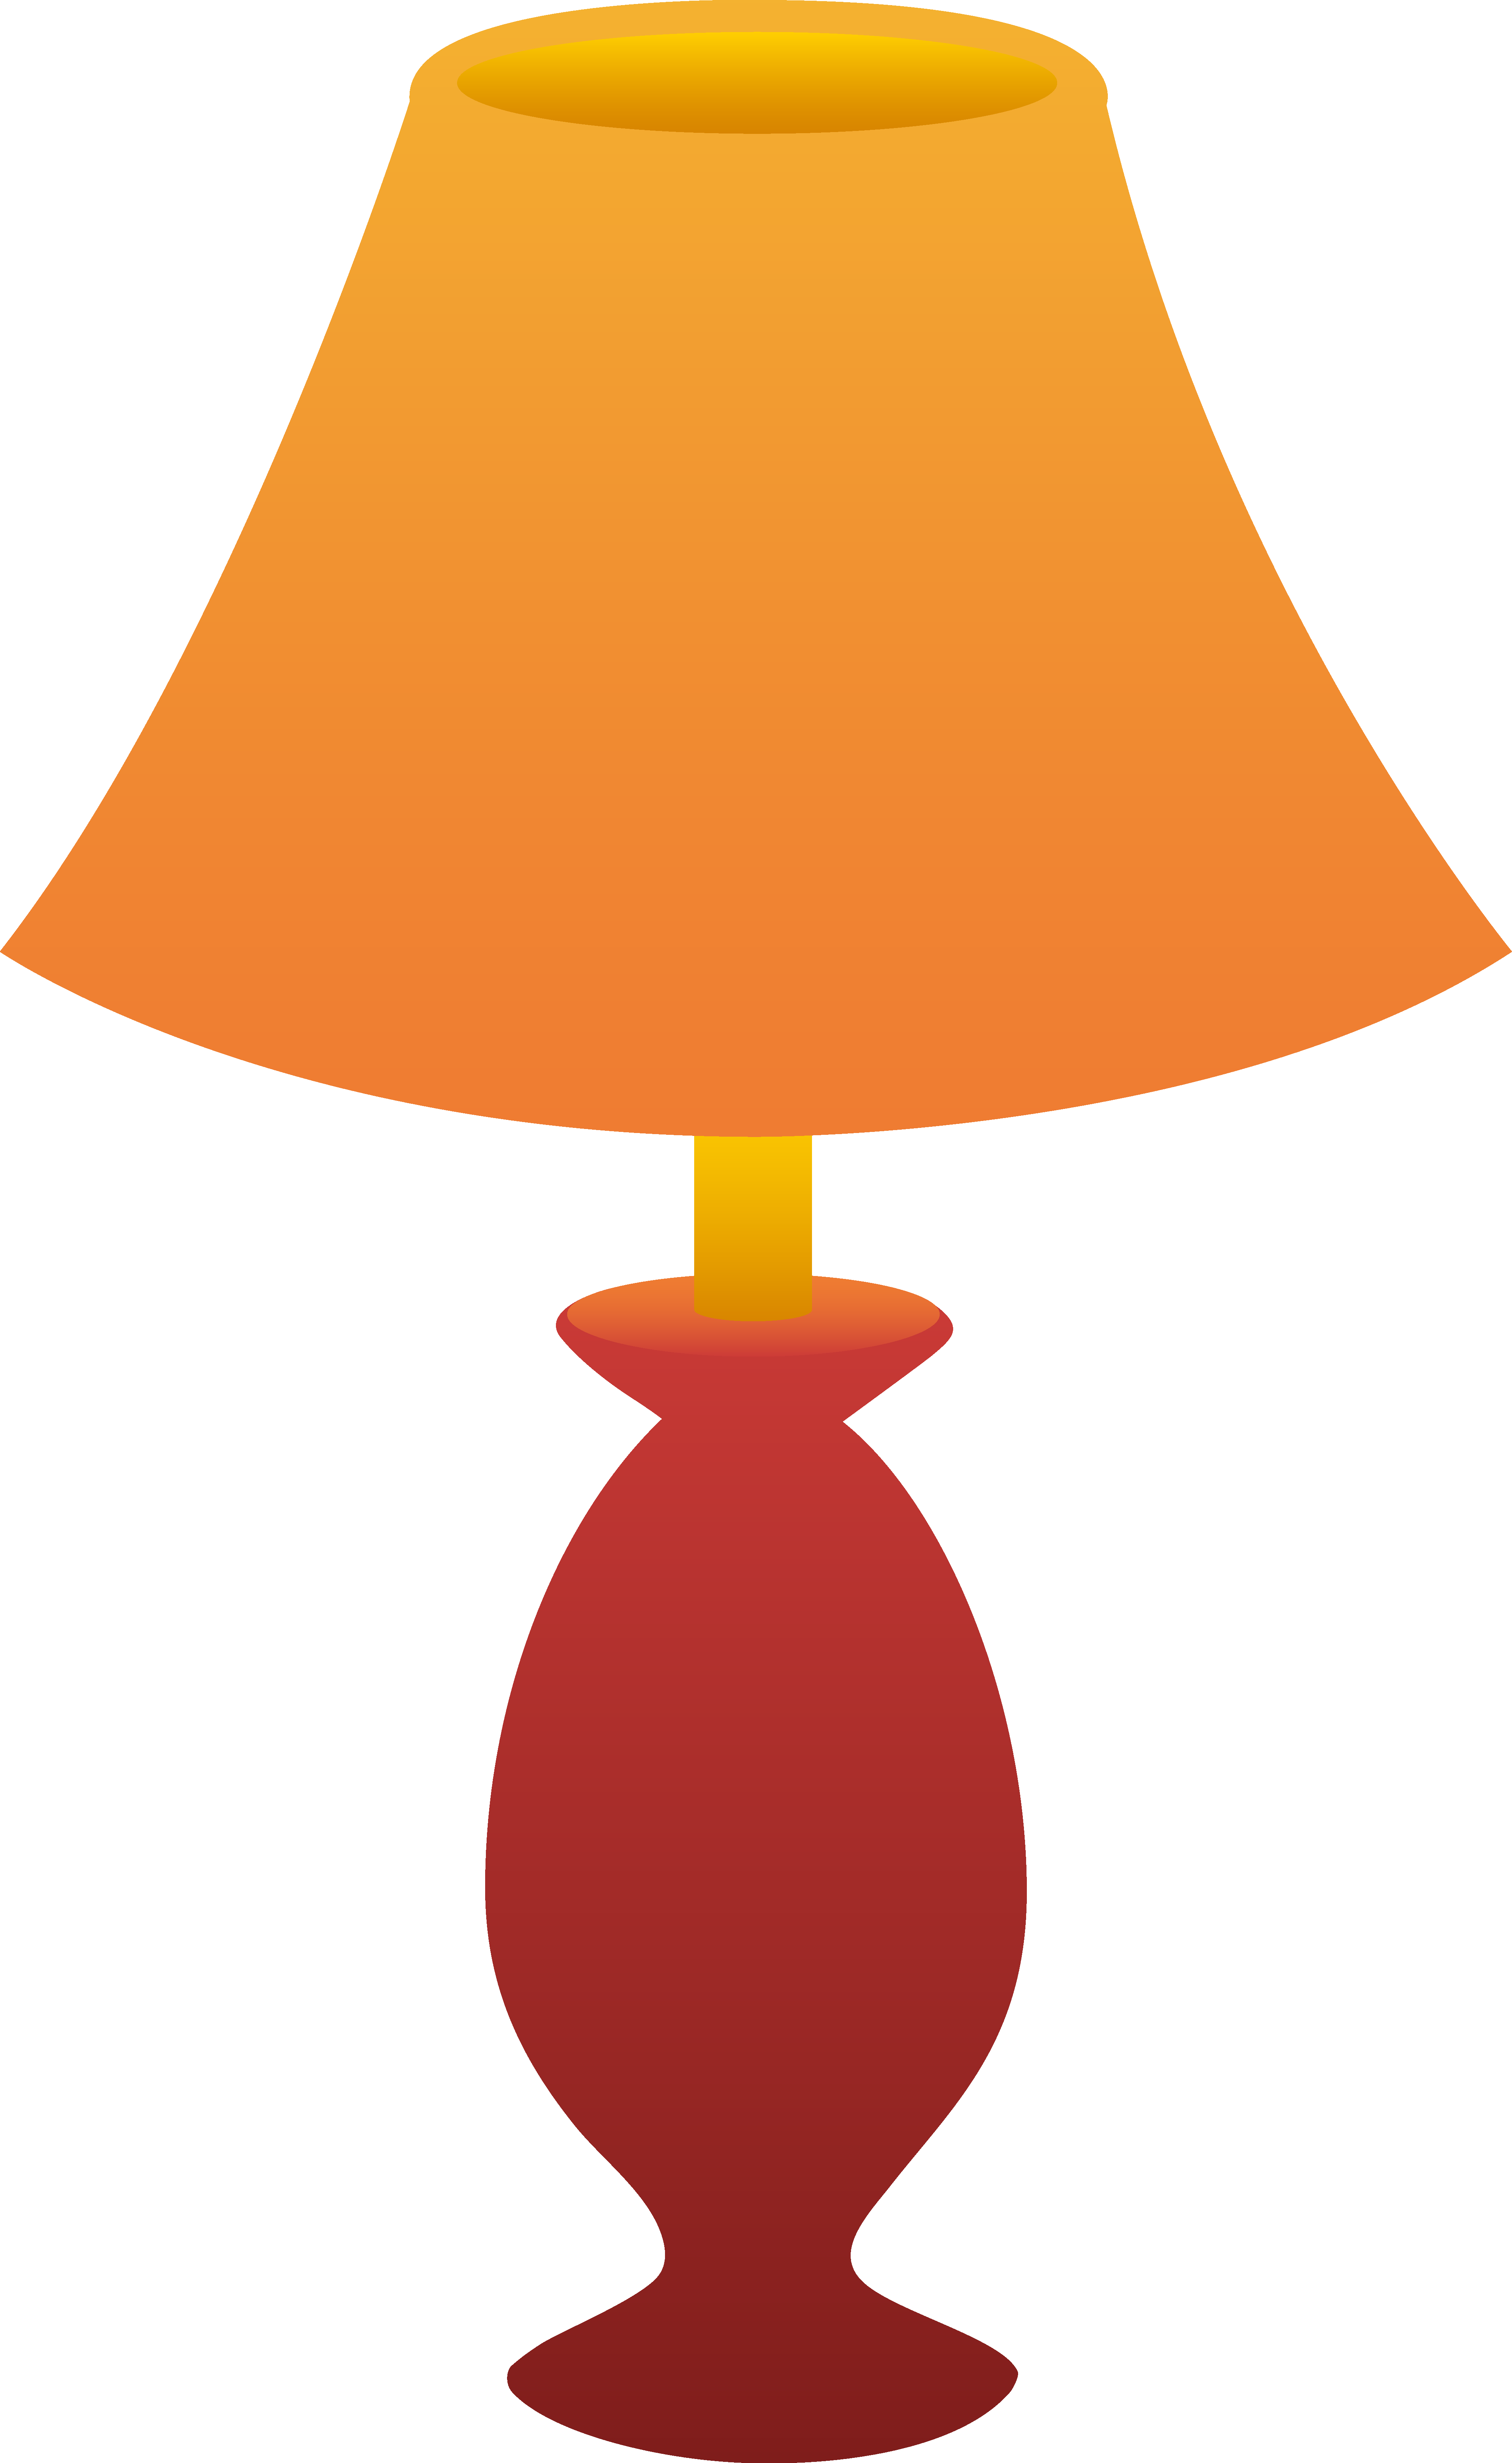 Lamp Clipart Image